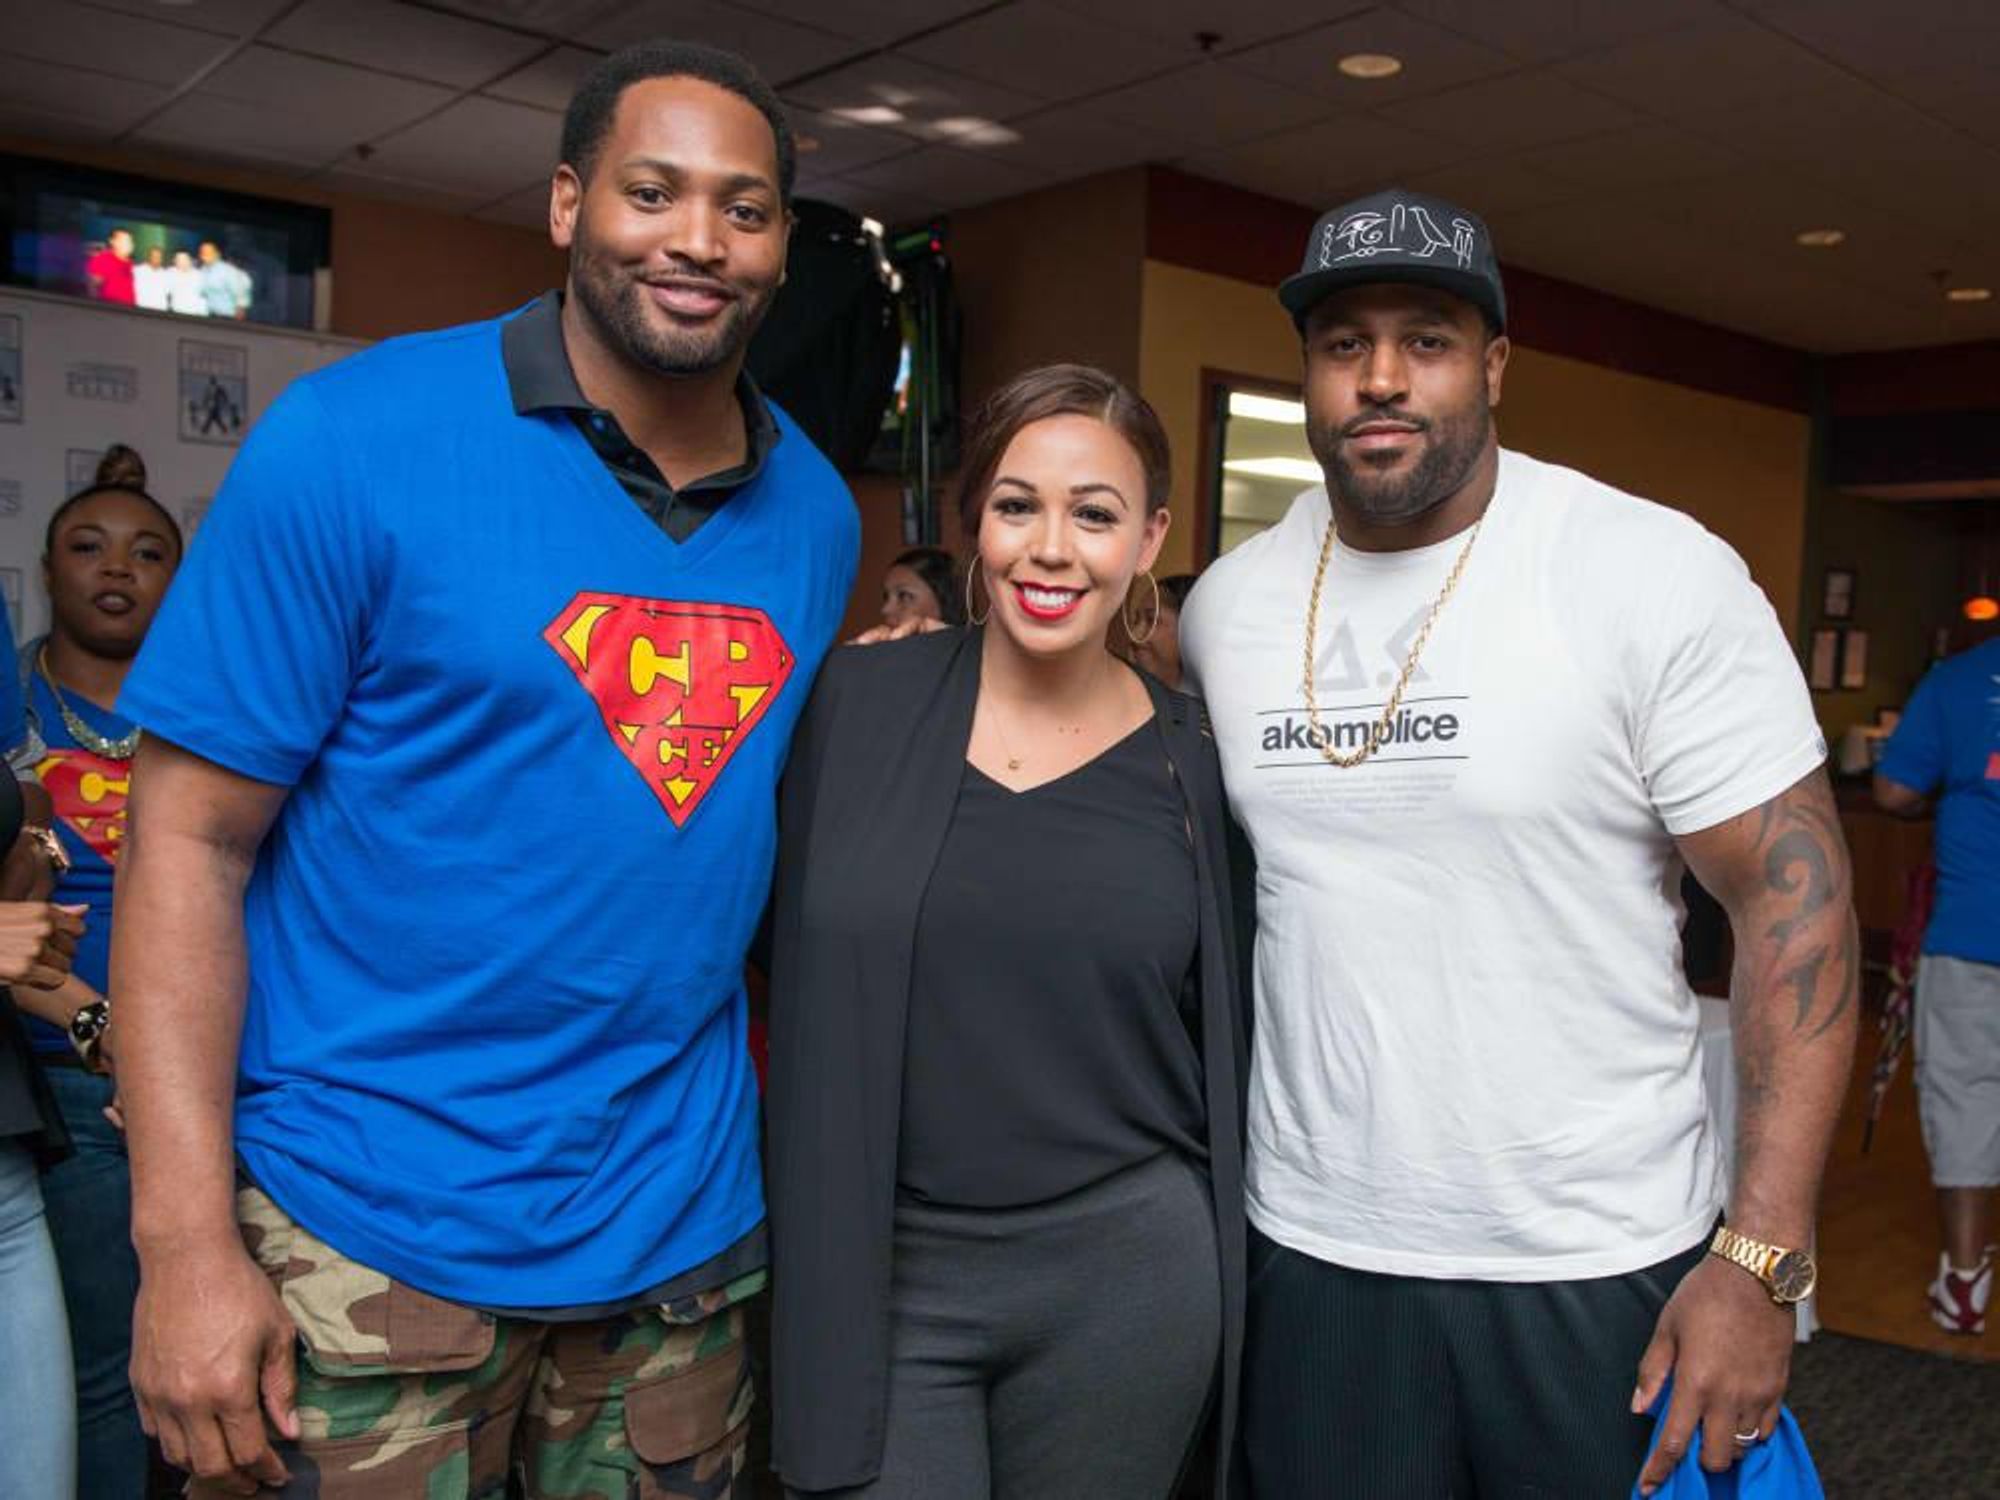 Chester Pitts bowling event Robert Horry, Devi Dev, Duane Brown